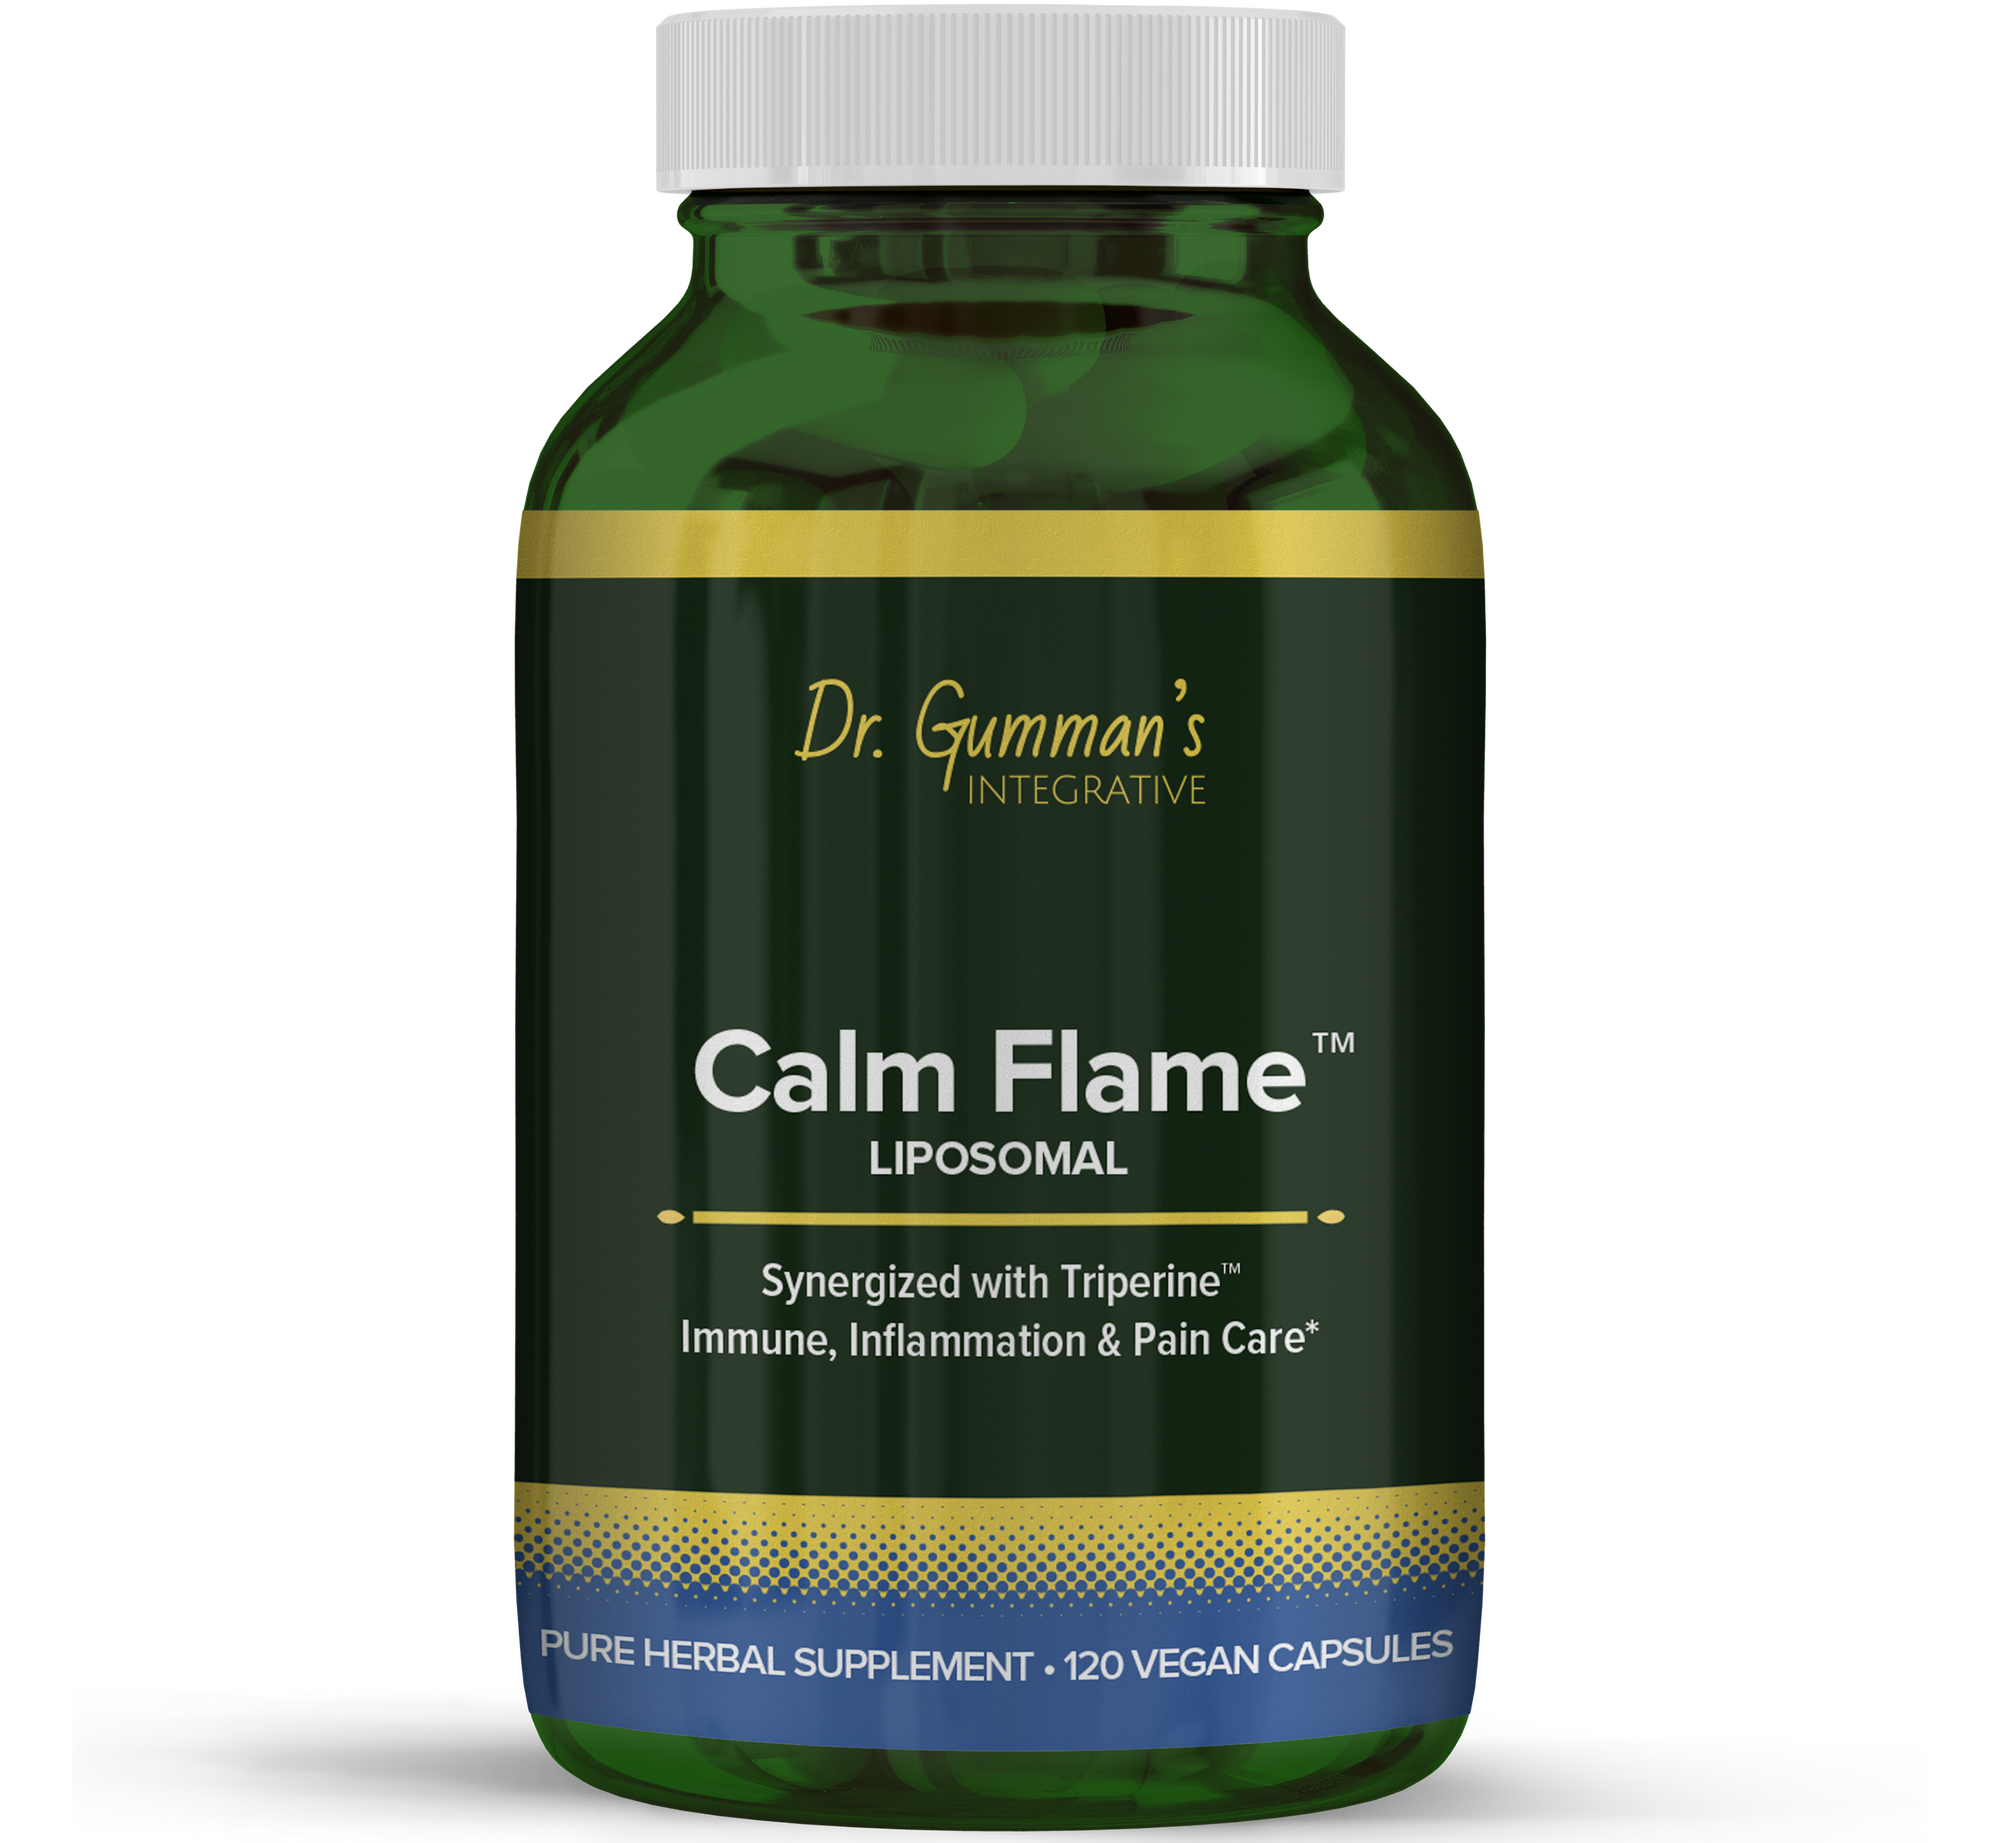 Calm Flame (Inflammation & Pain Care)